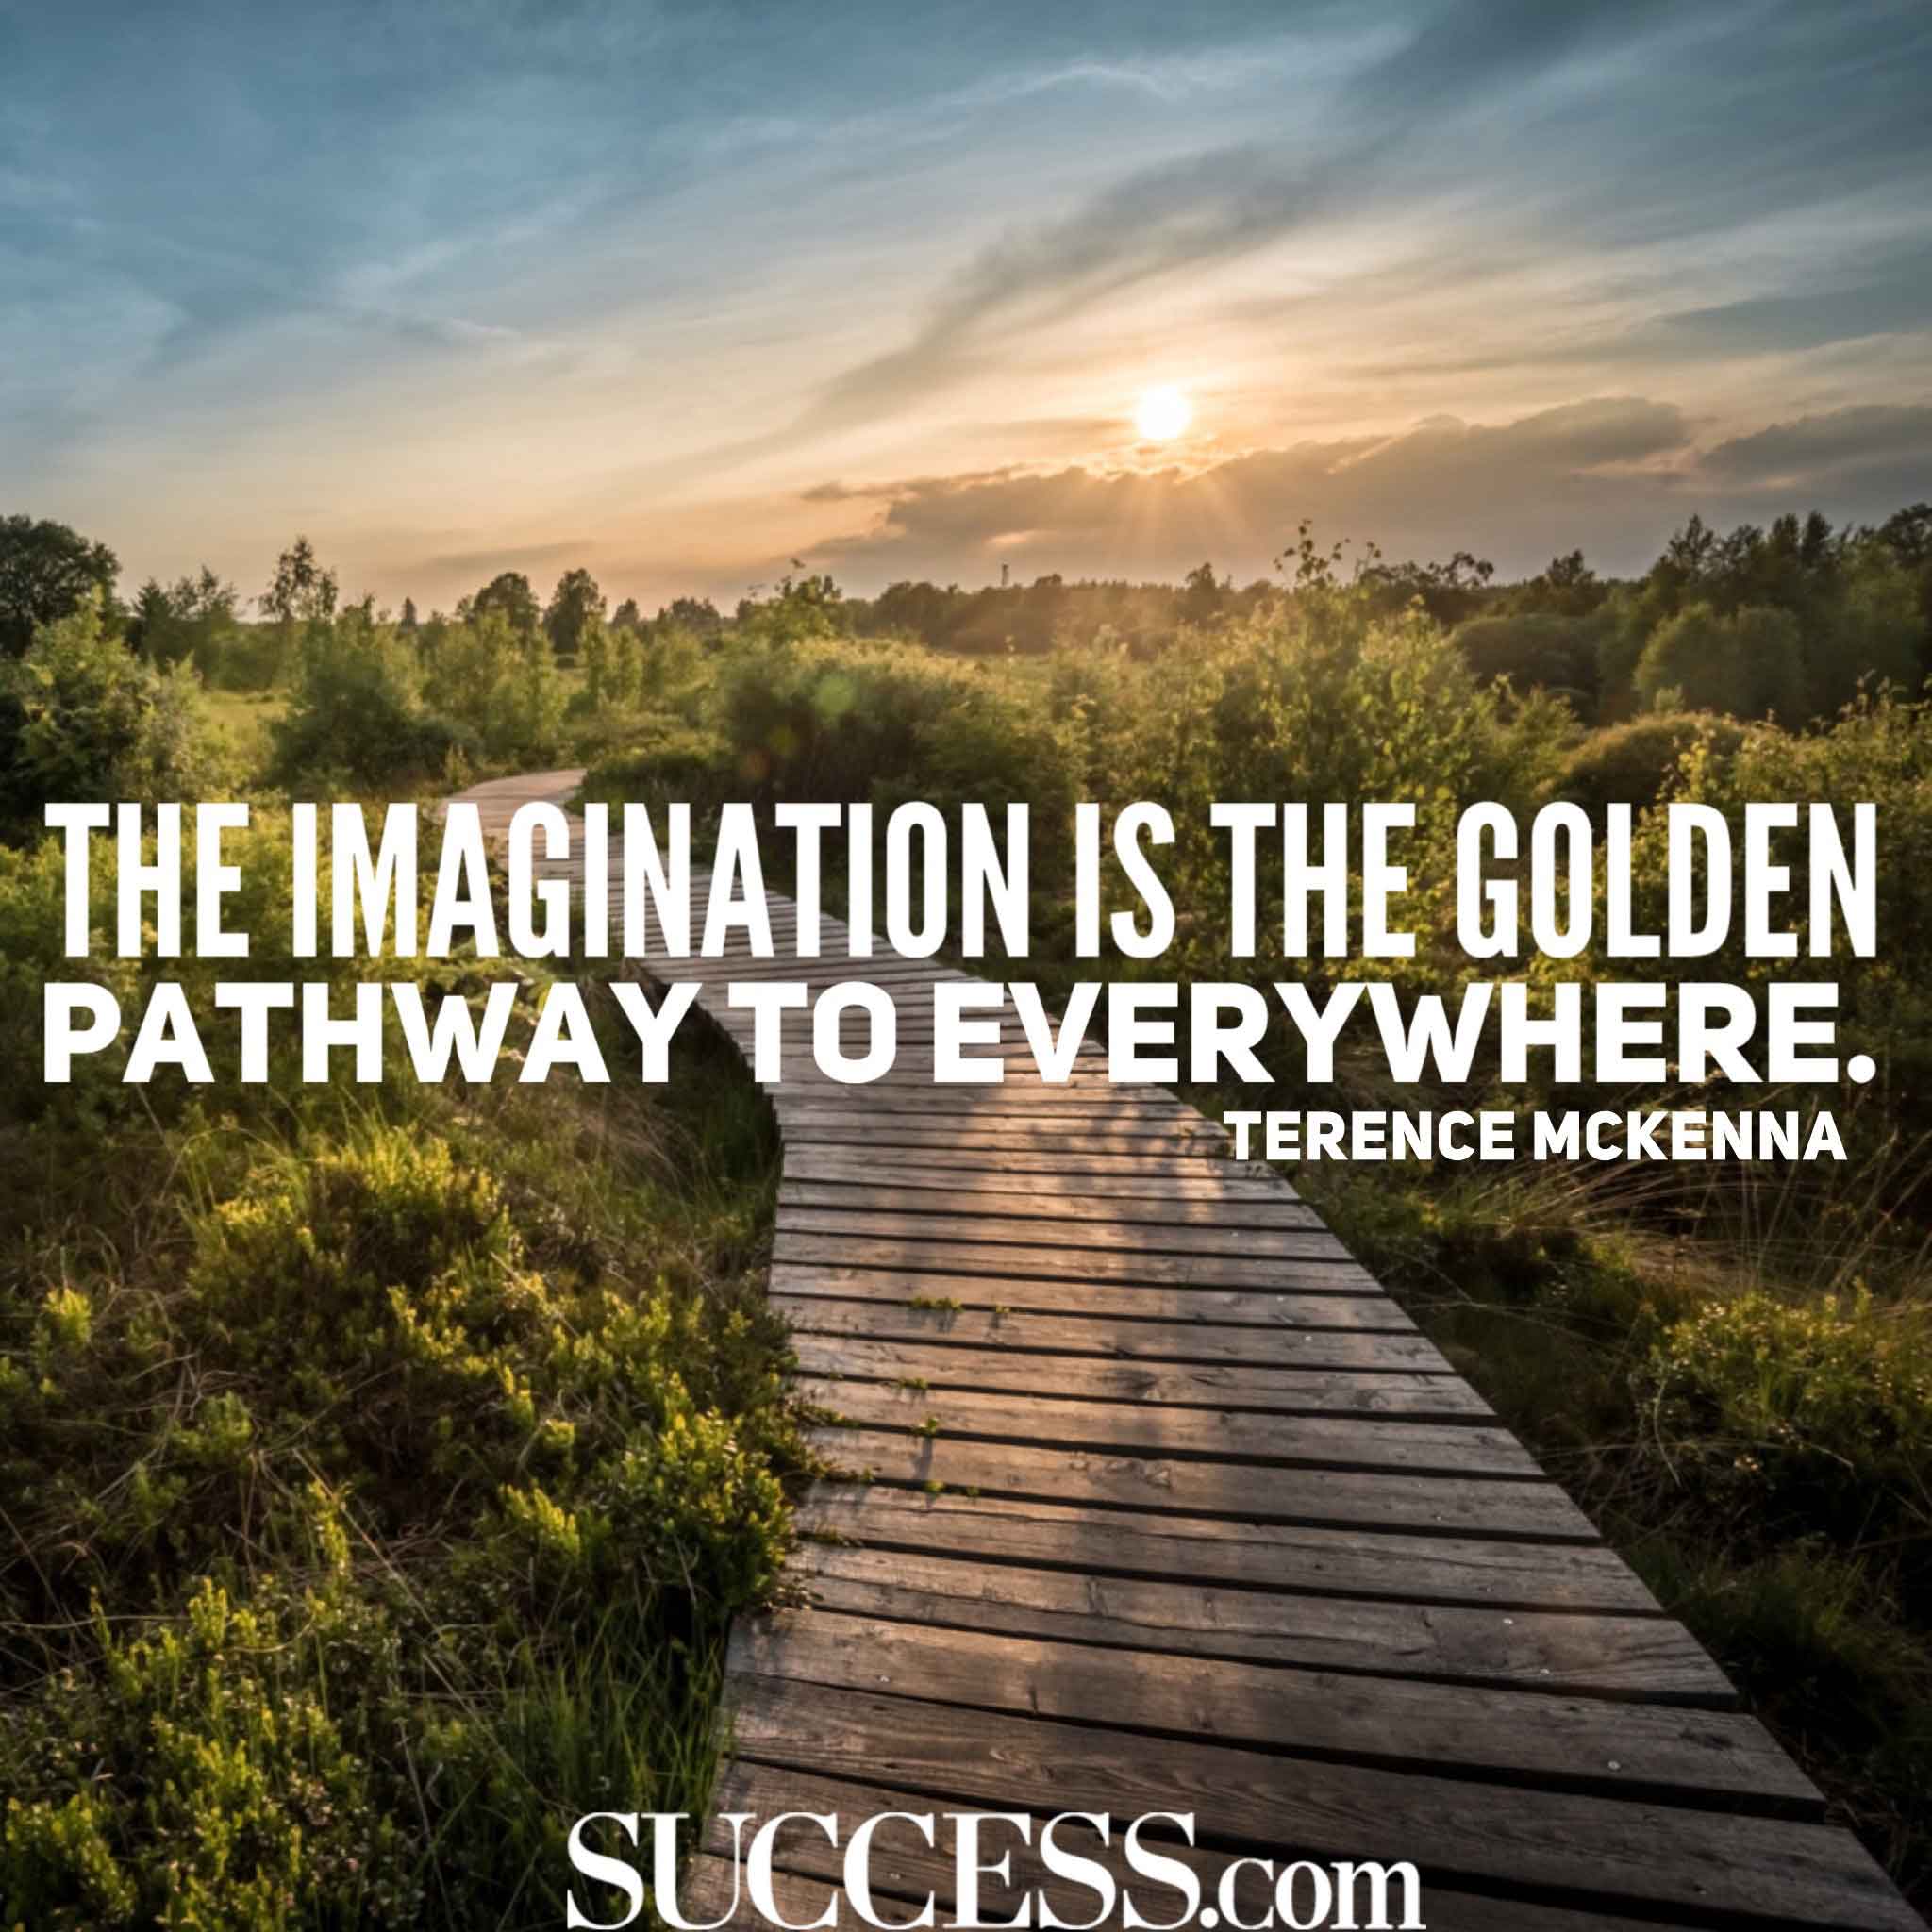 The Imagination is the golden pathway to everywhere – Terence Mckenna